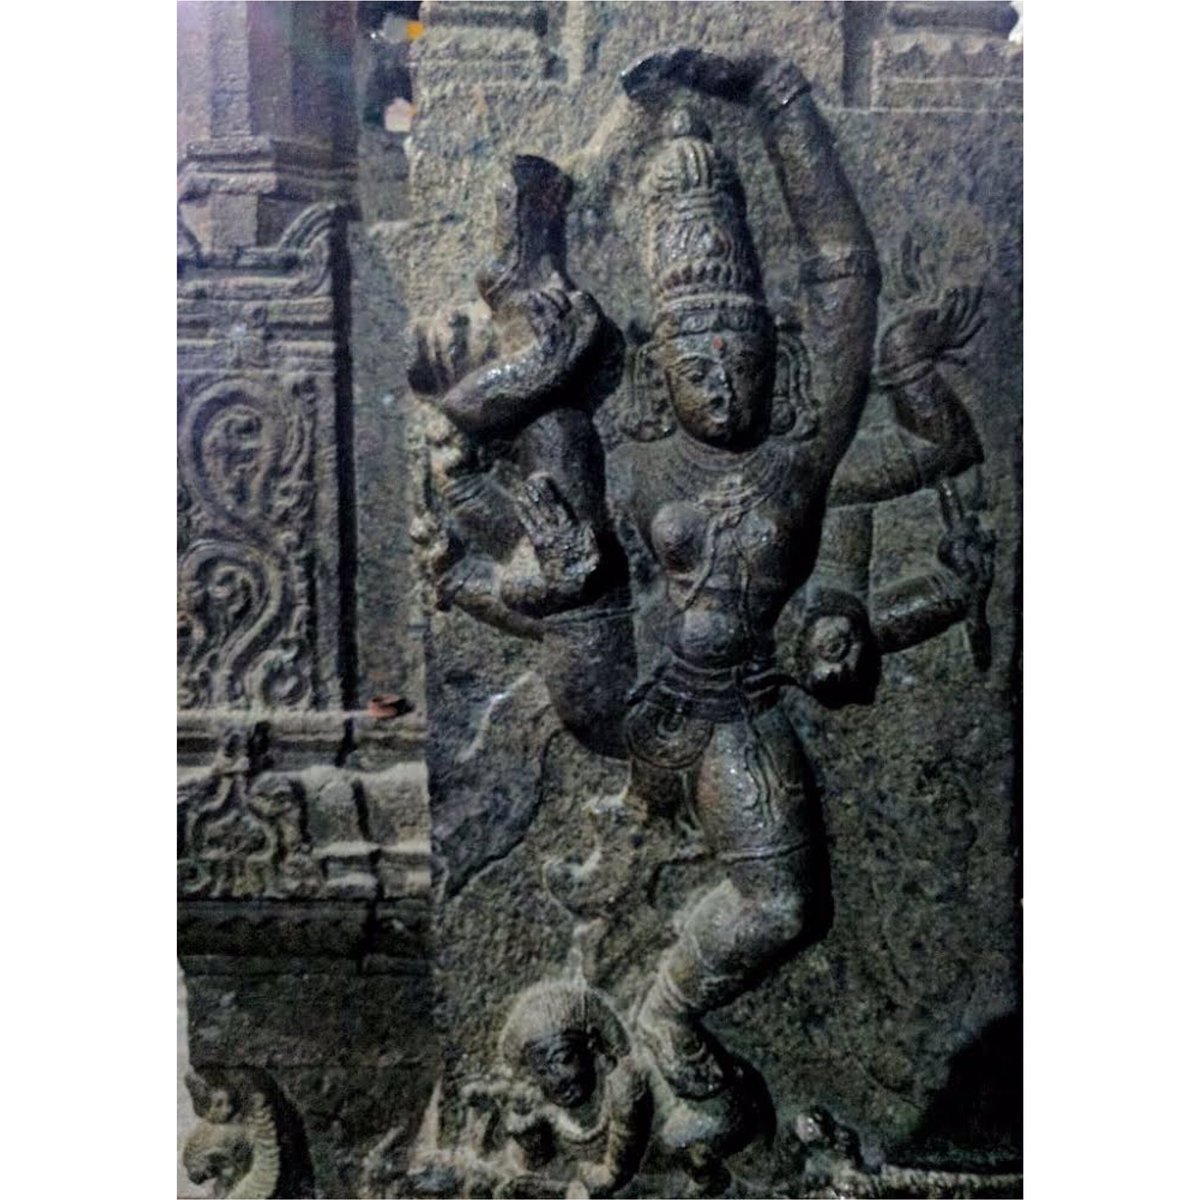 ऊ is for ऊर्ध्वतांडव मूर्ति or Urdhvatandava murtiThe Chidambaram Mahatmya, a 12th century CE text, tells the legend of how Shiva used this pose to become the presiding deity and Lord of Chidambaram or Tillai as it was known then.  #AksharArt  #ArtByTheLetter